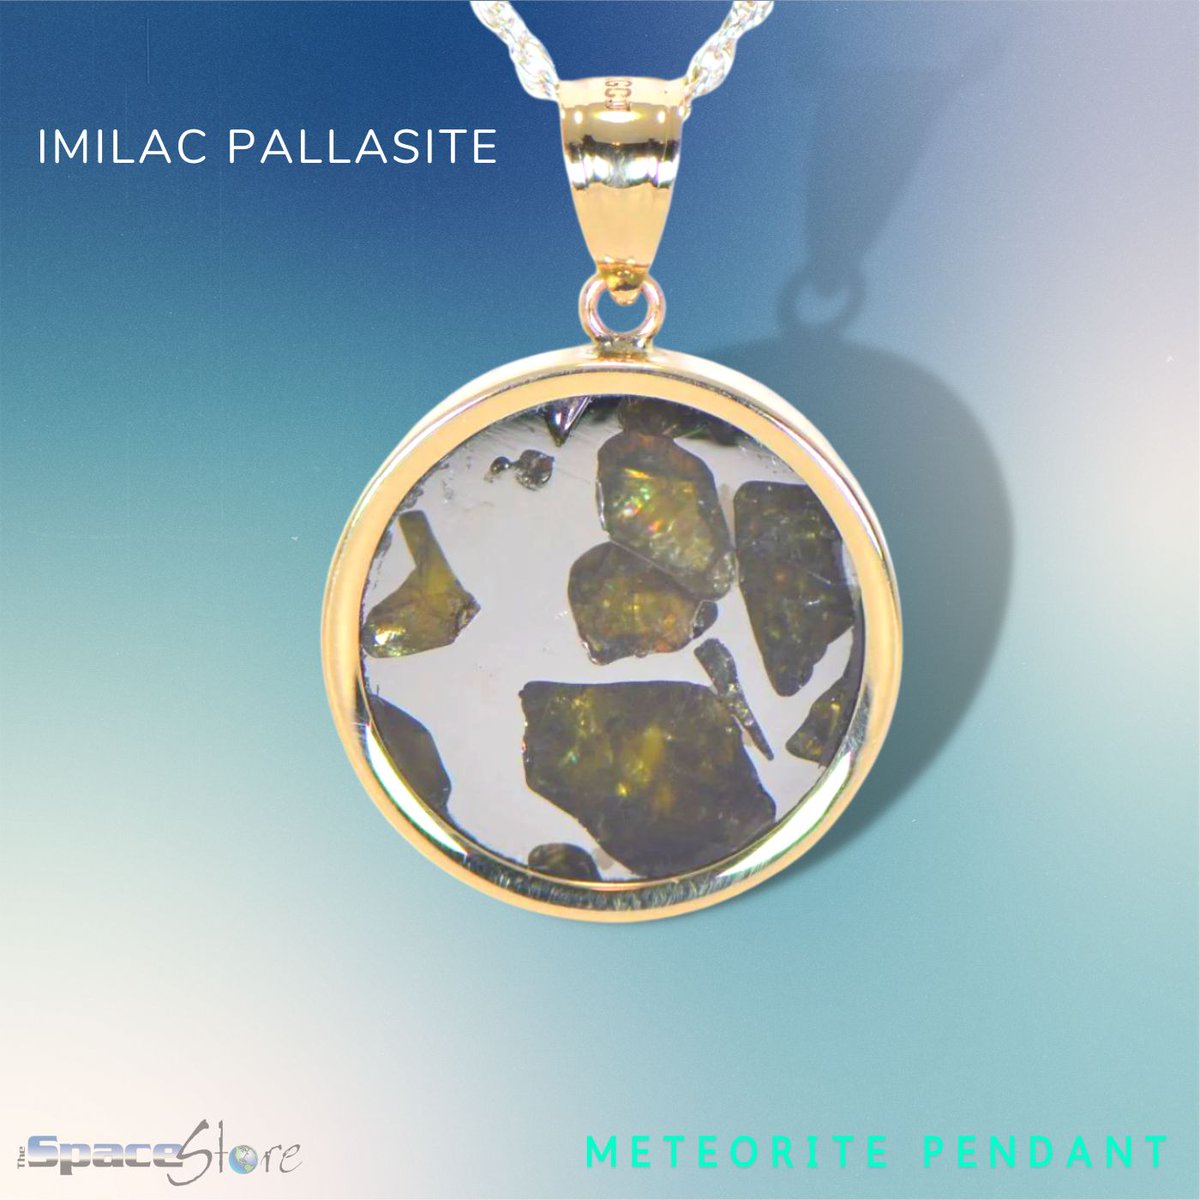 IMILAC PALLASITE METEORITE PENDANT - METEORITE JEWELRY - GOLD On Offer: Beautiful Imilac Pallasite Meteorite Pendant set in 14K Gold. Dimensions not including bail: 
.
thespacestore.com/collections/me…
.
#METEORITEJEWELRY #meteorite #naša #SpaceX